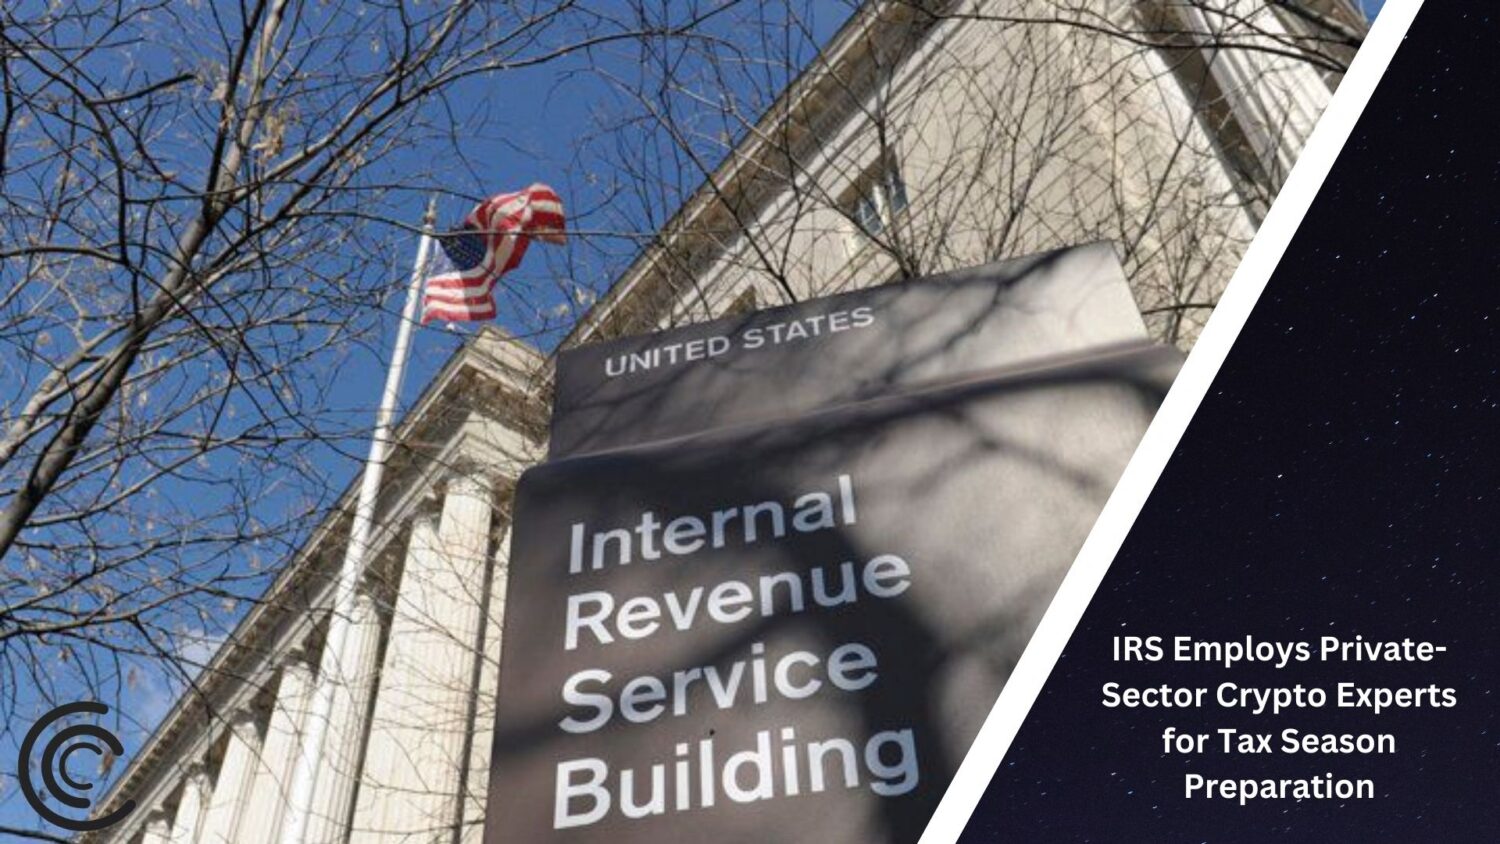 Irs Employs Private-Sector Crypto Experts For Tax Season Preparation